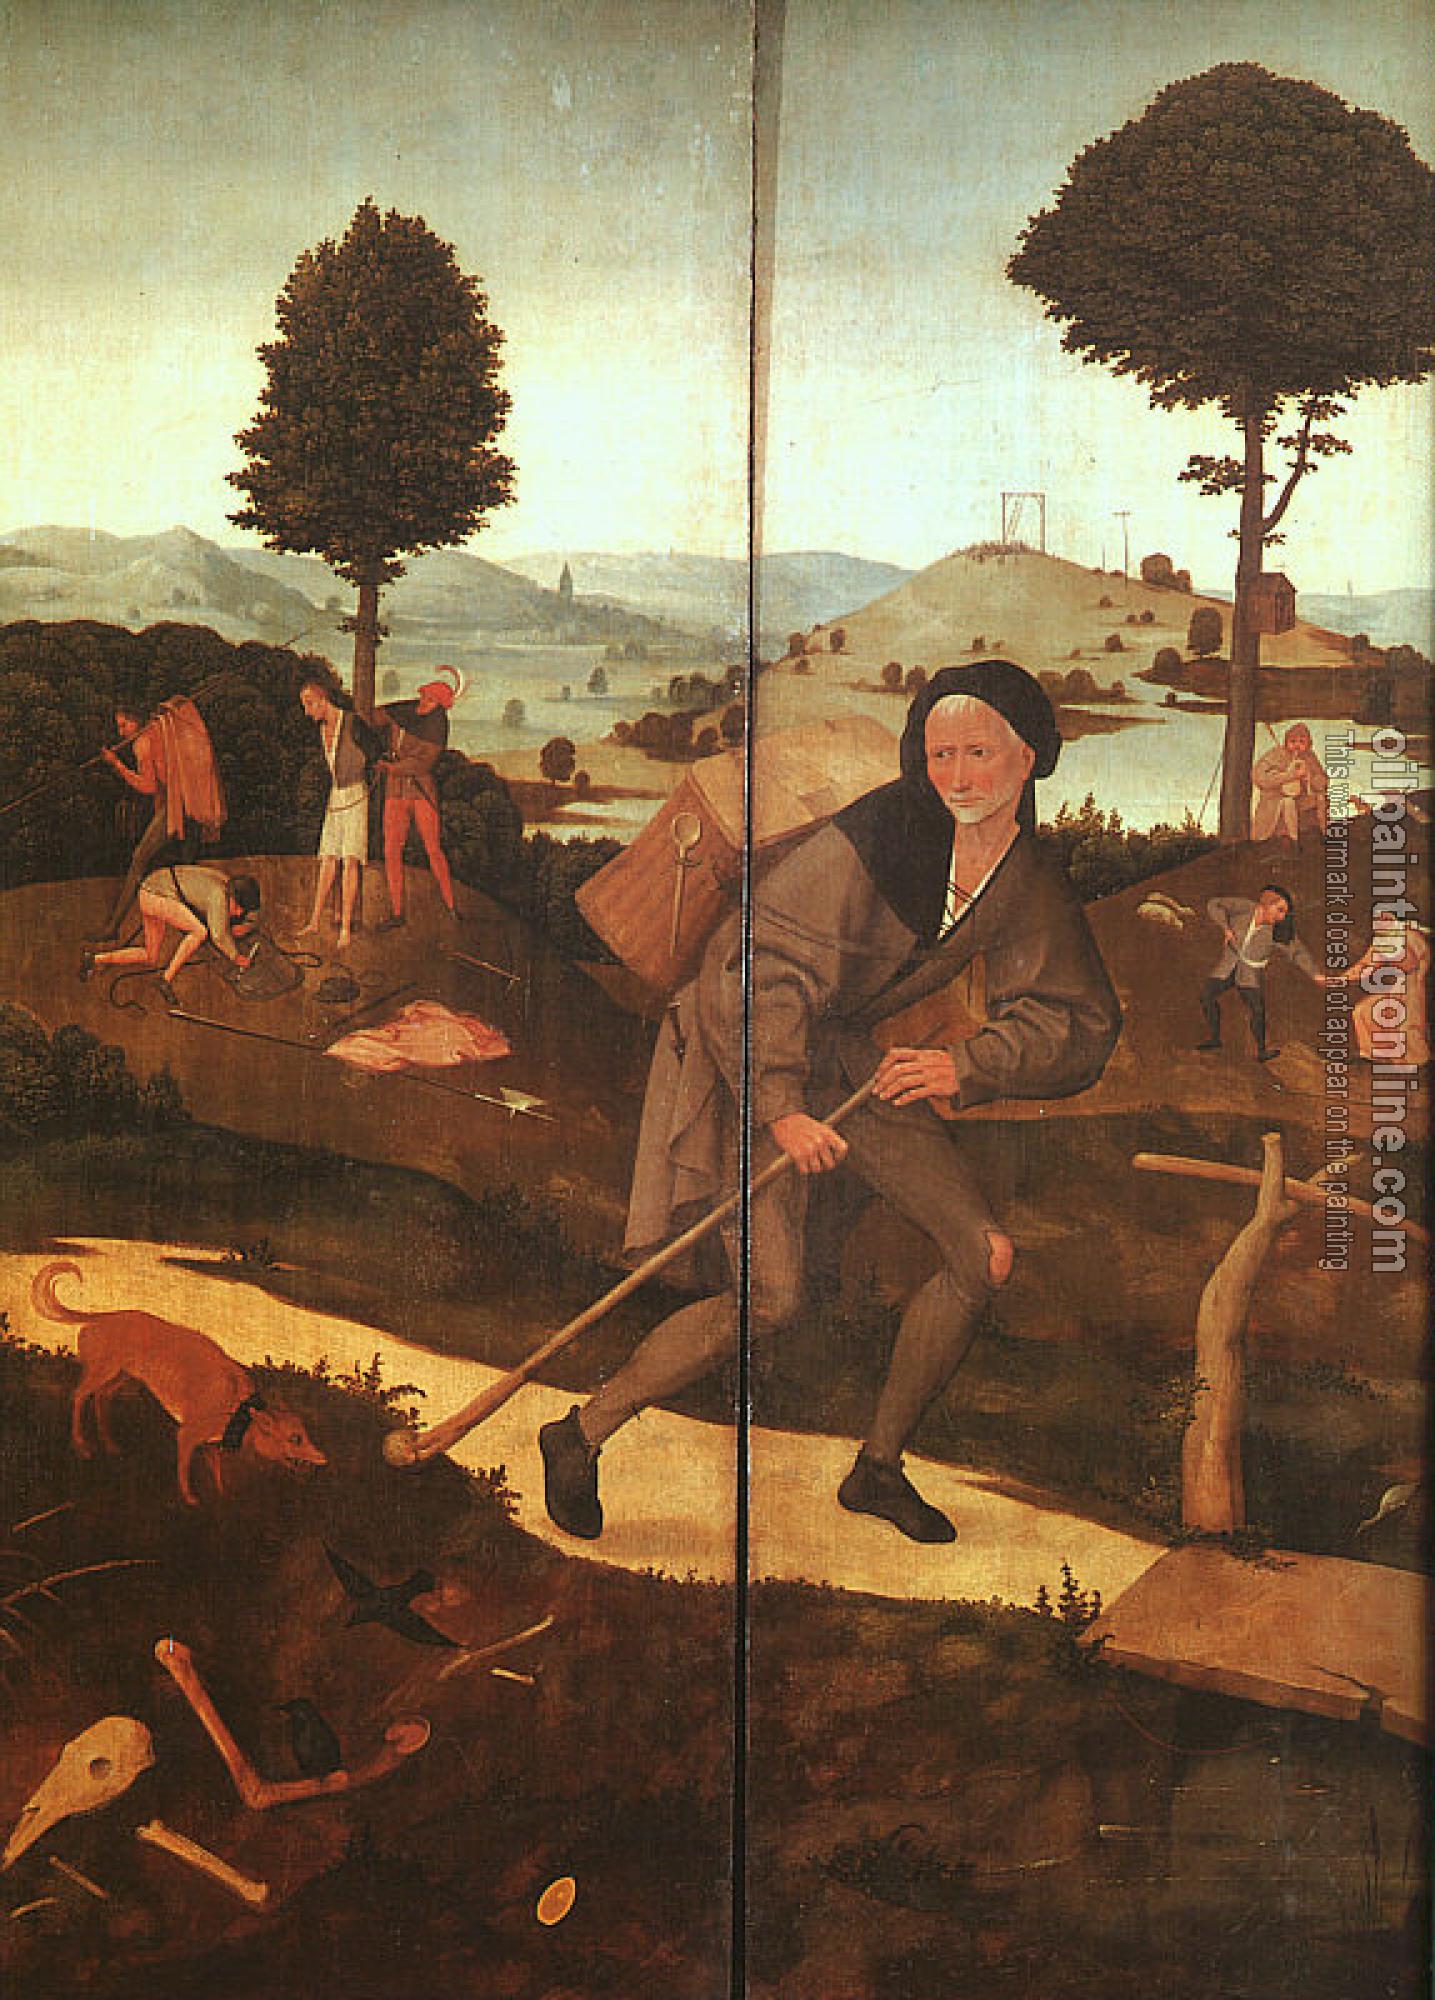 Bosch, Hieronymus - The Path of Life (The Wayfarer), outer wings of The Haywain triptych